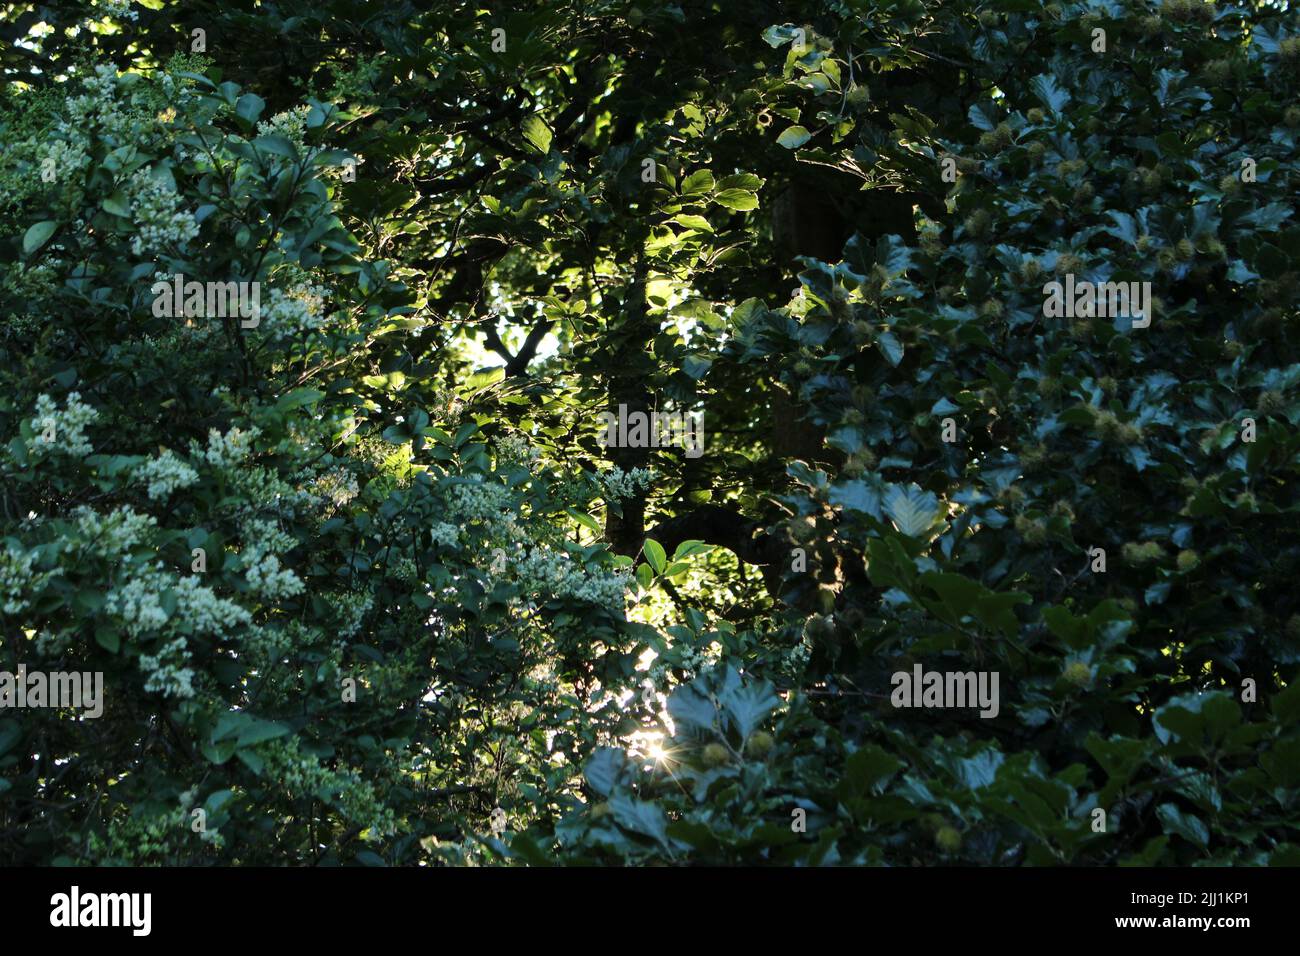 Sun peeks through lush forest vegetation at sunrise in The Byes, Sidmouth, Devon, Natural background, calm wallpaper Stock Photo